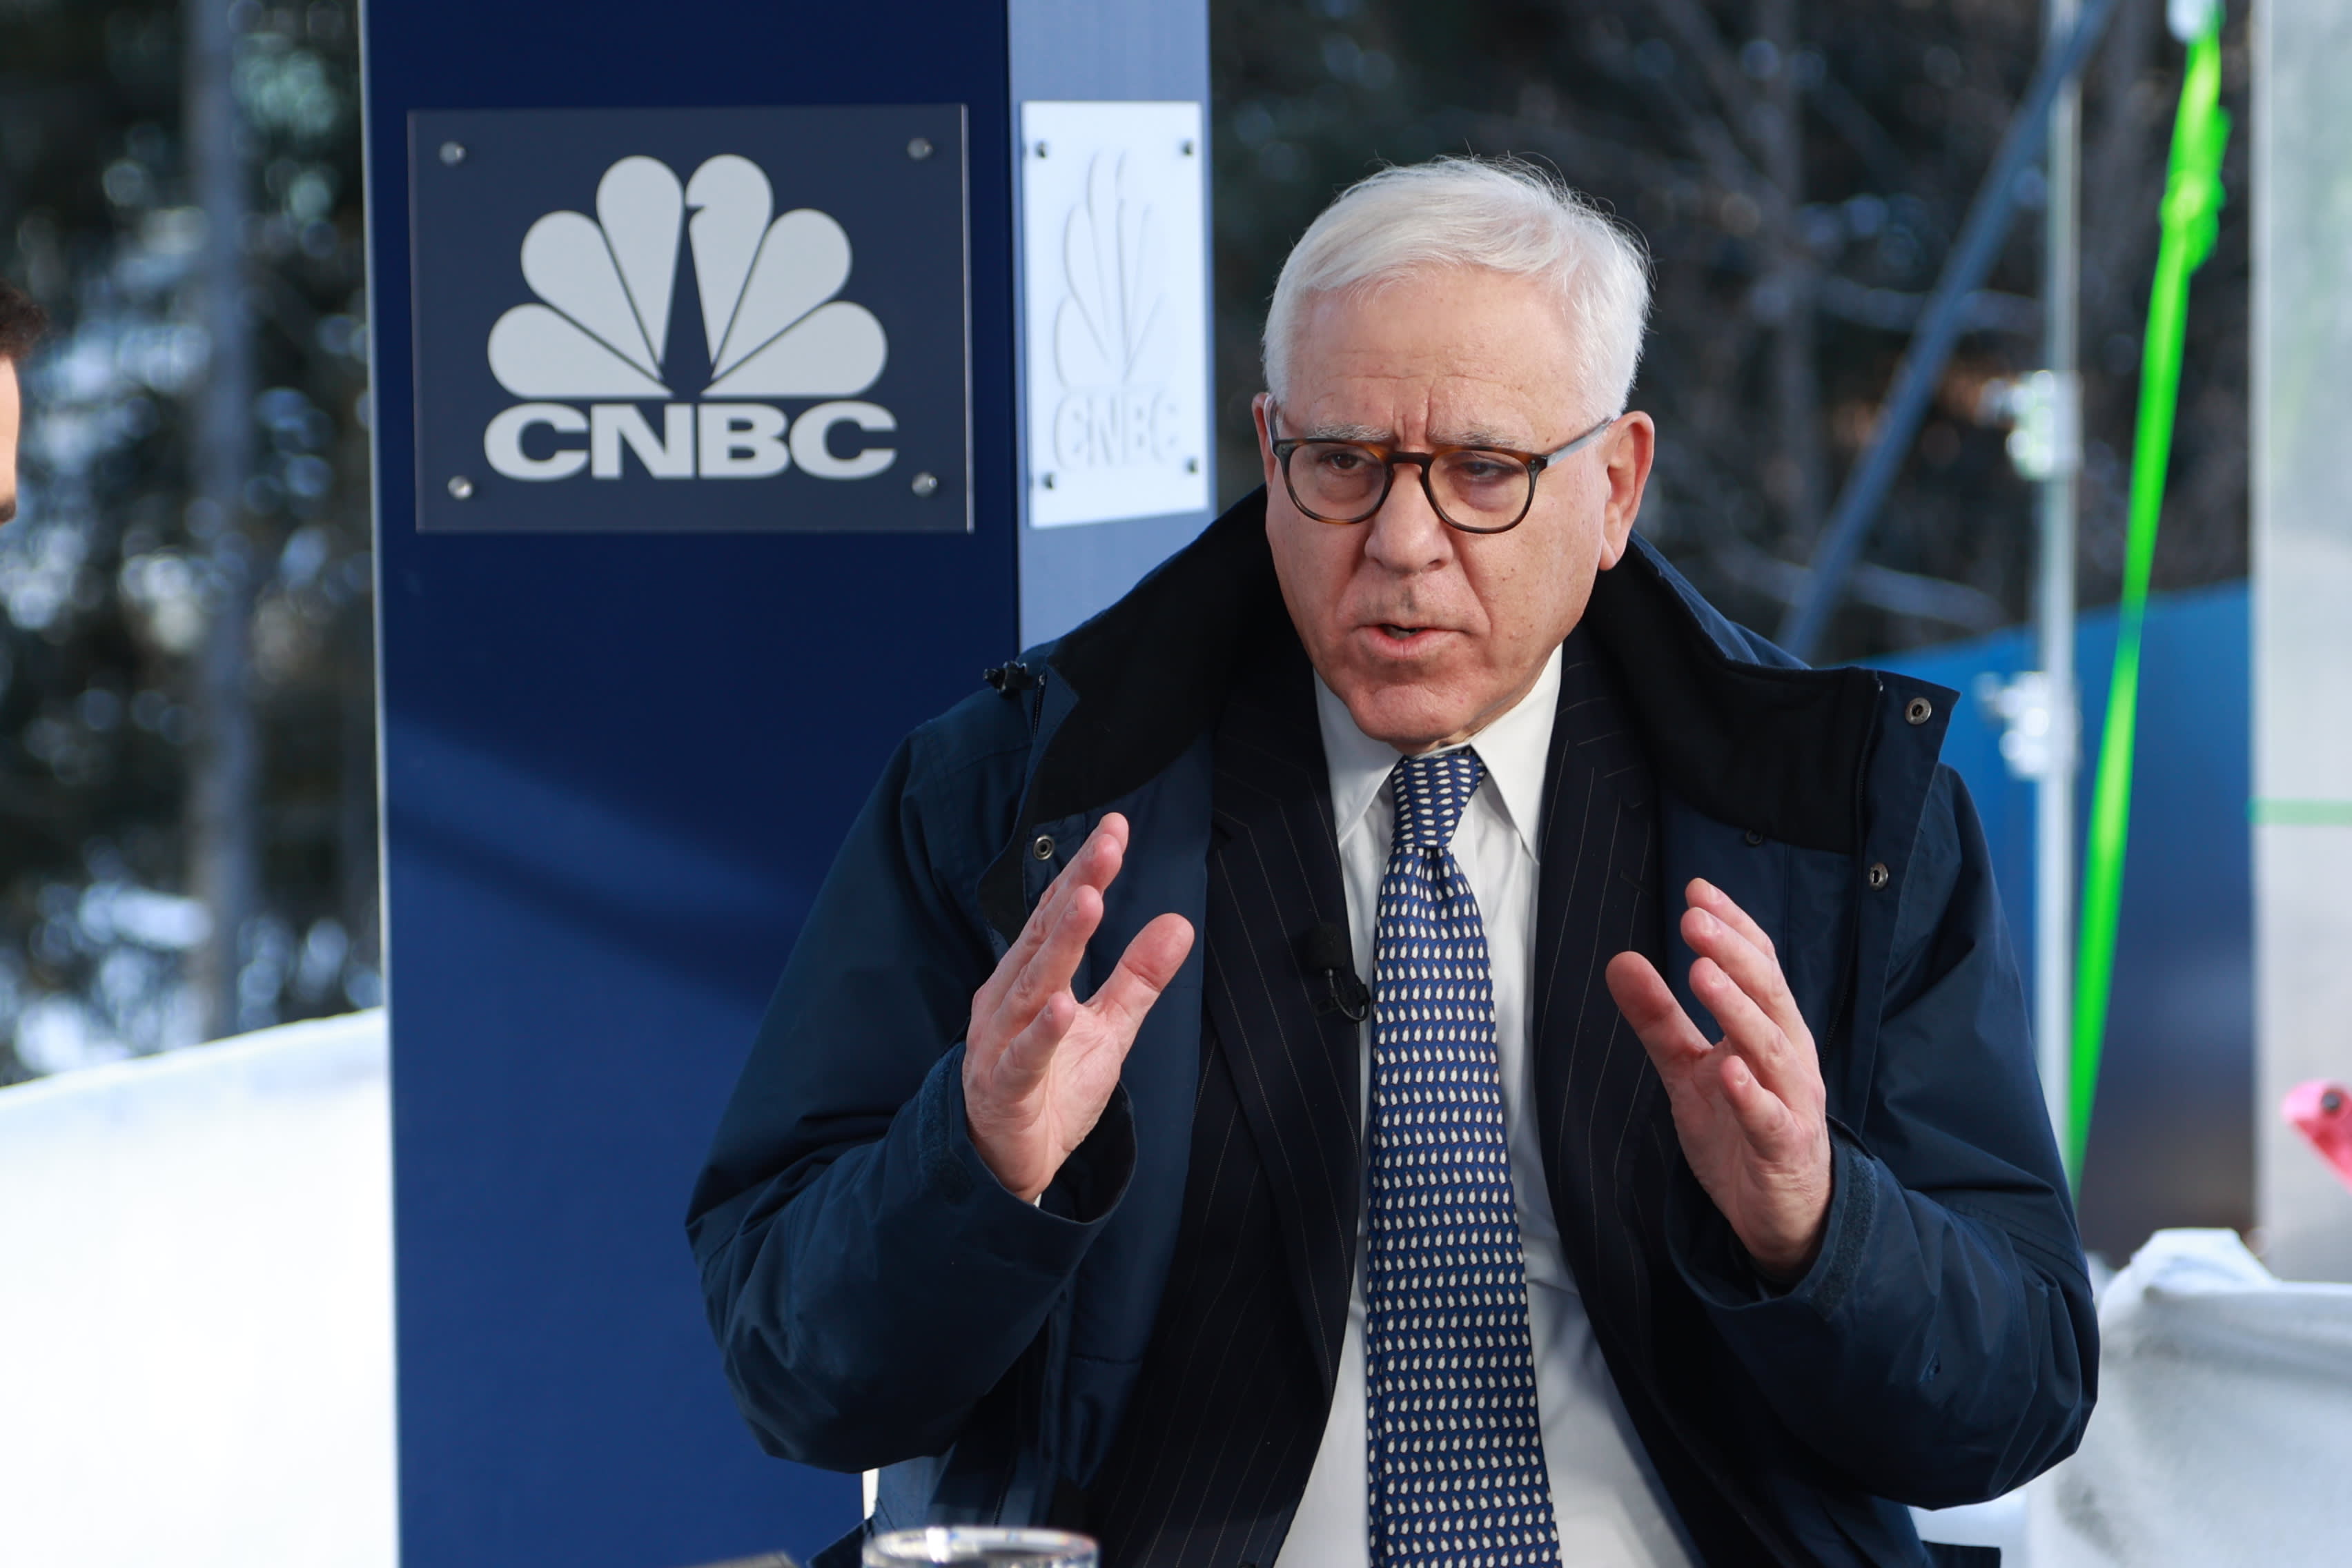 Here's why Carlyle Group's Rubenstein says now is a good time to invest.